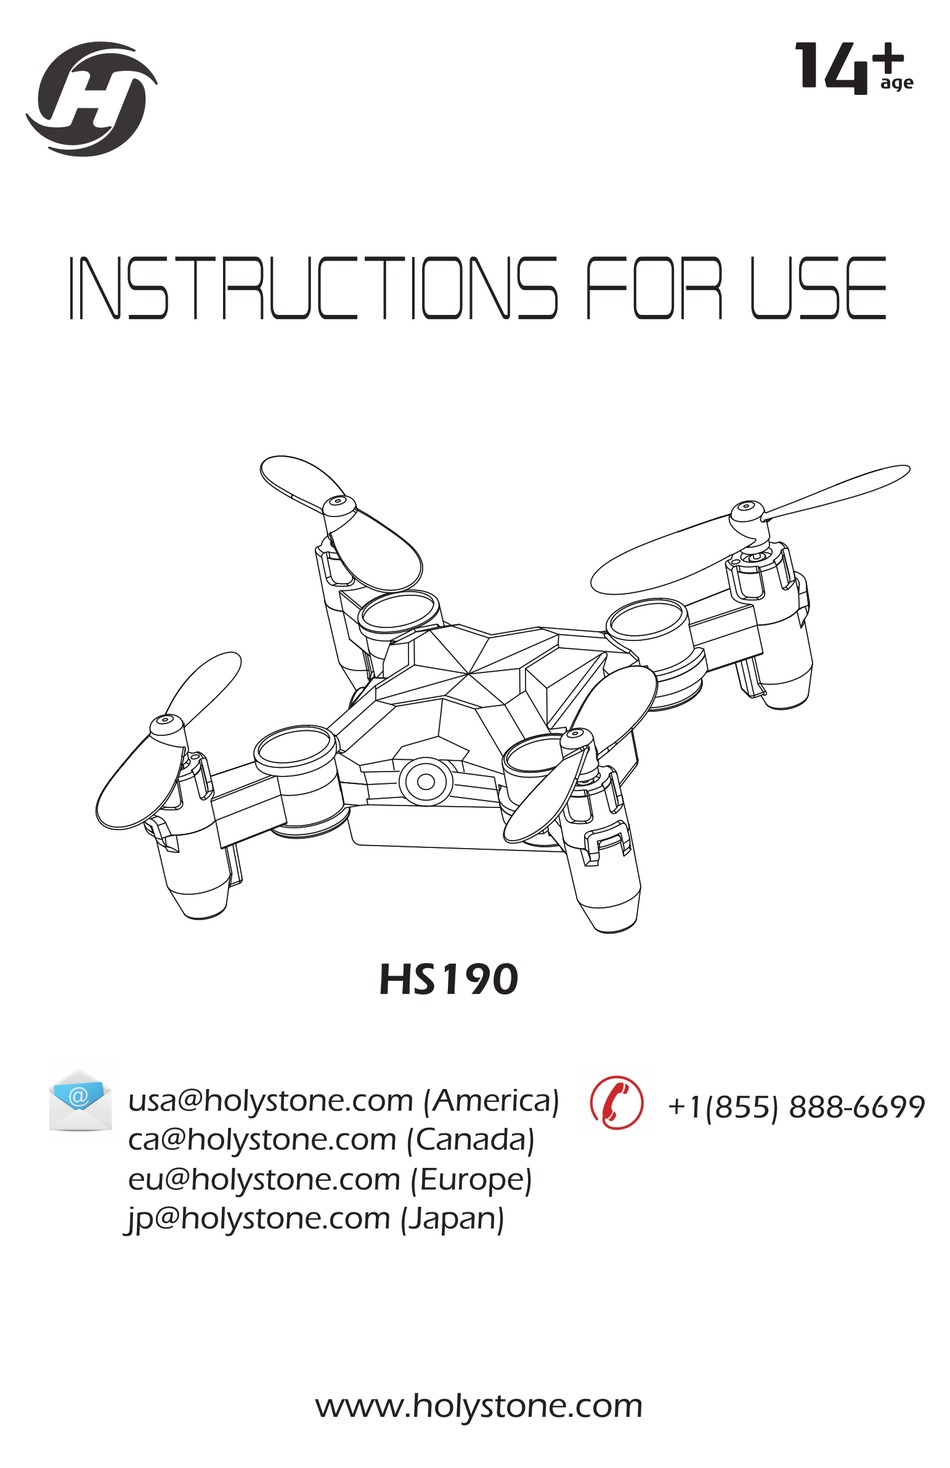 How To Fly Holy Stone Drone Hs190 - Drone HD Wallpaper Regimage.Org